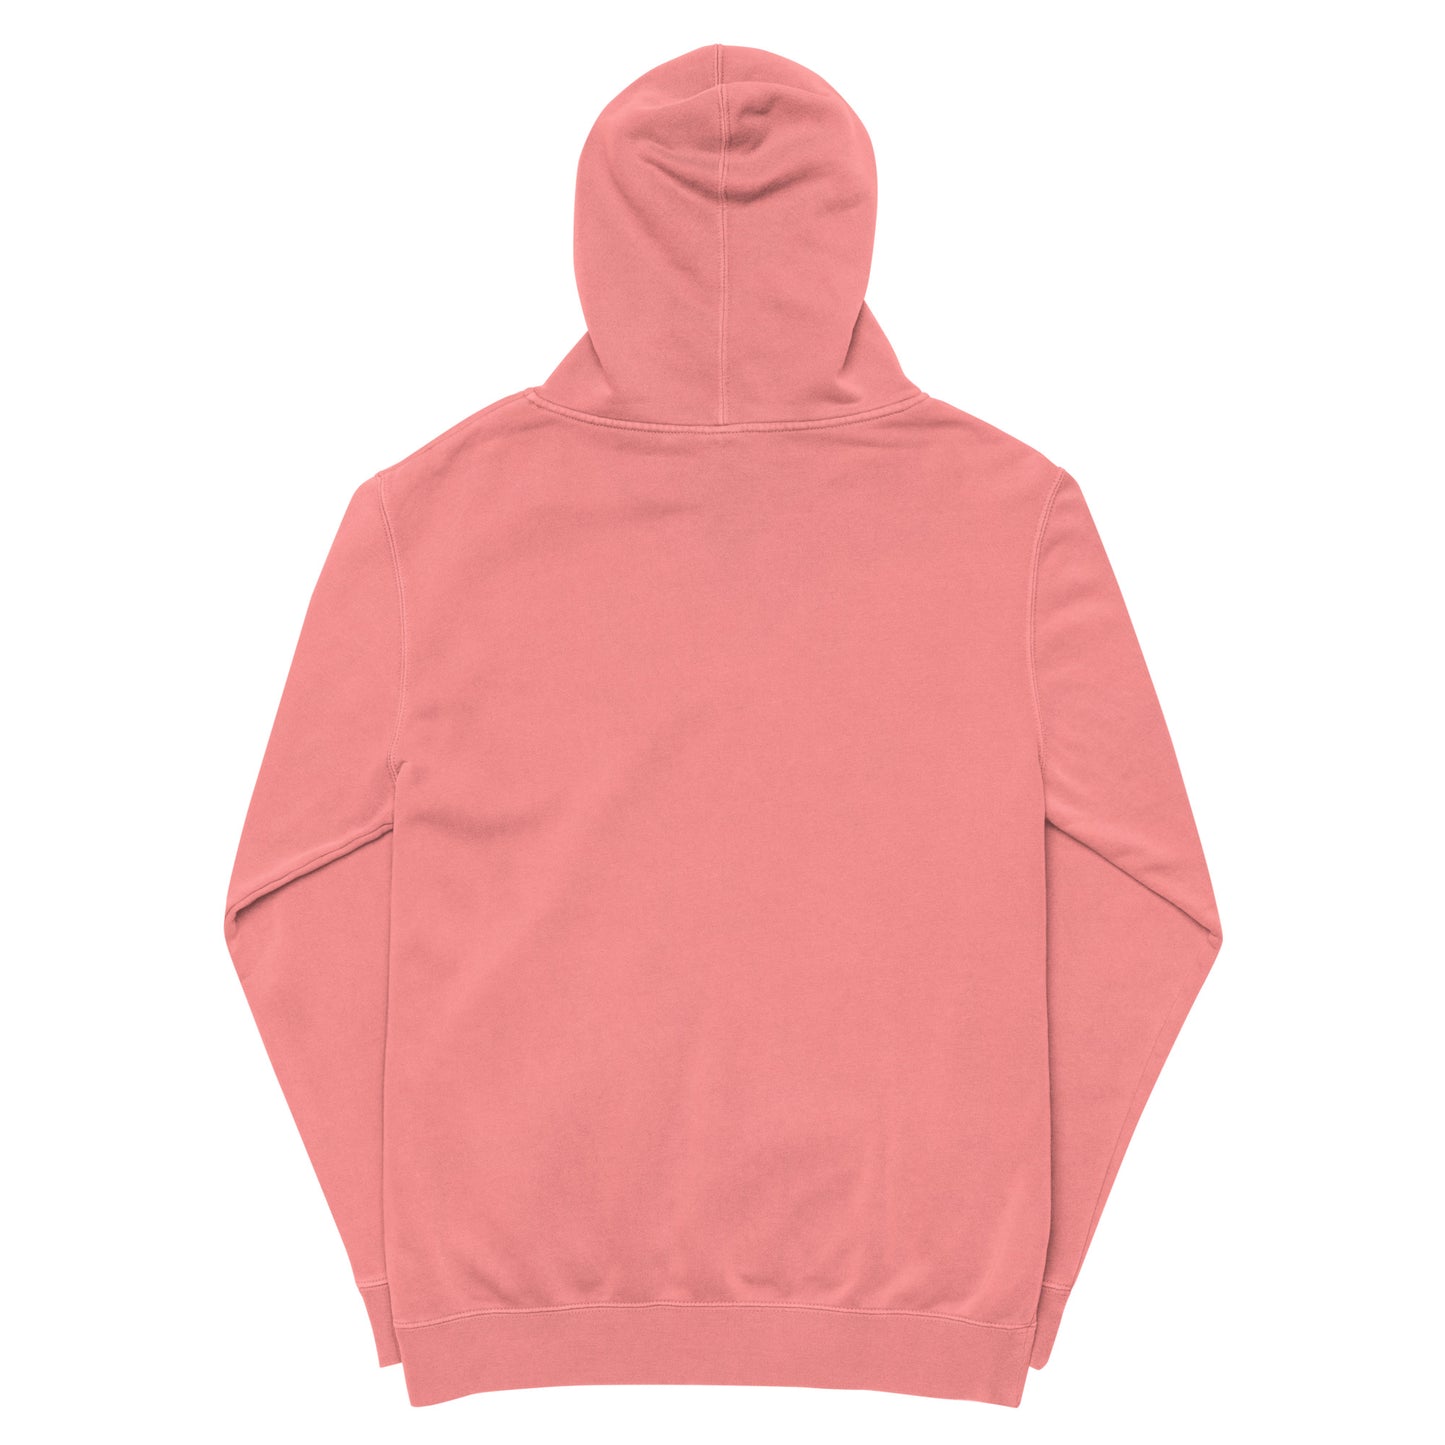 KGE Signature Pigment-Dyed Hoodie | Independent Trading Co